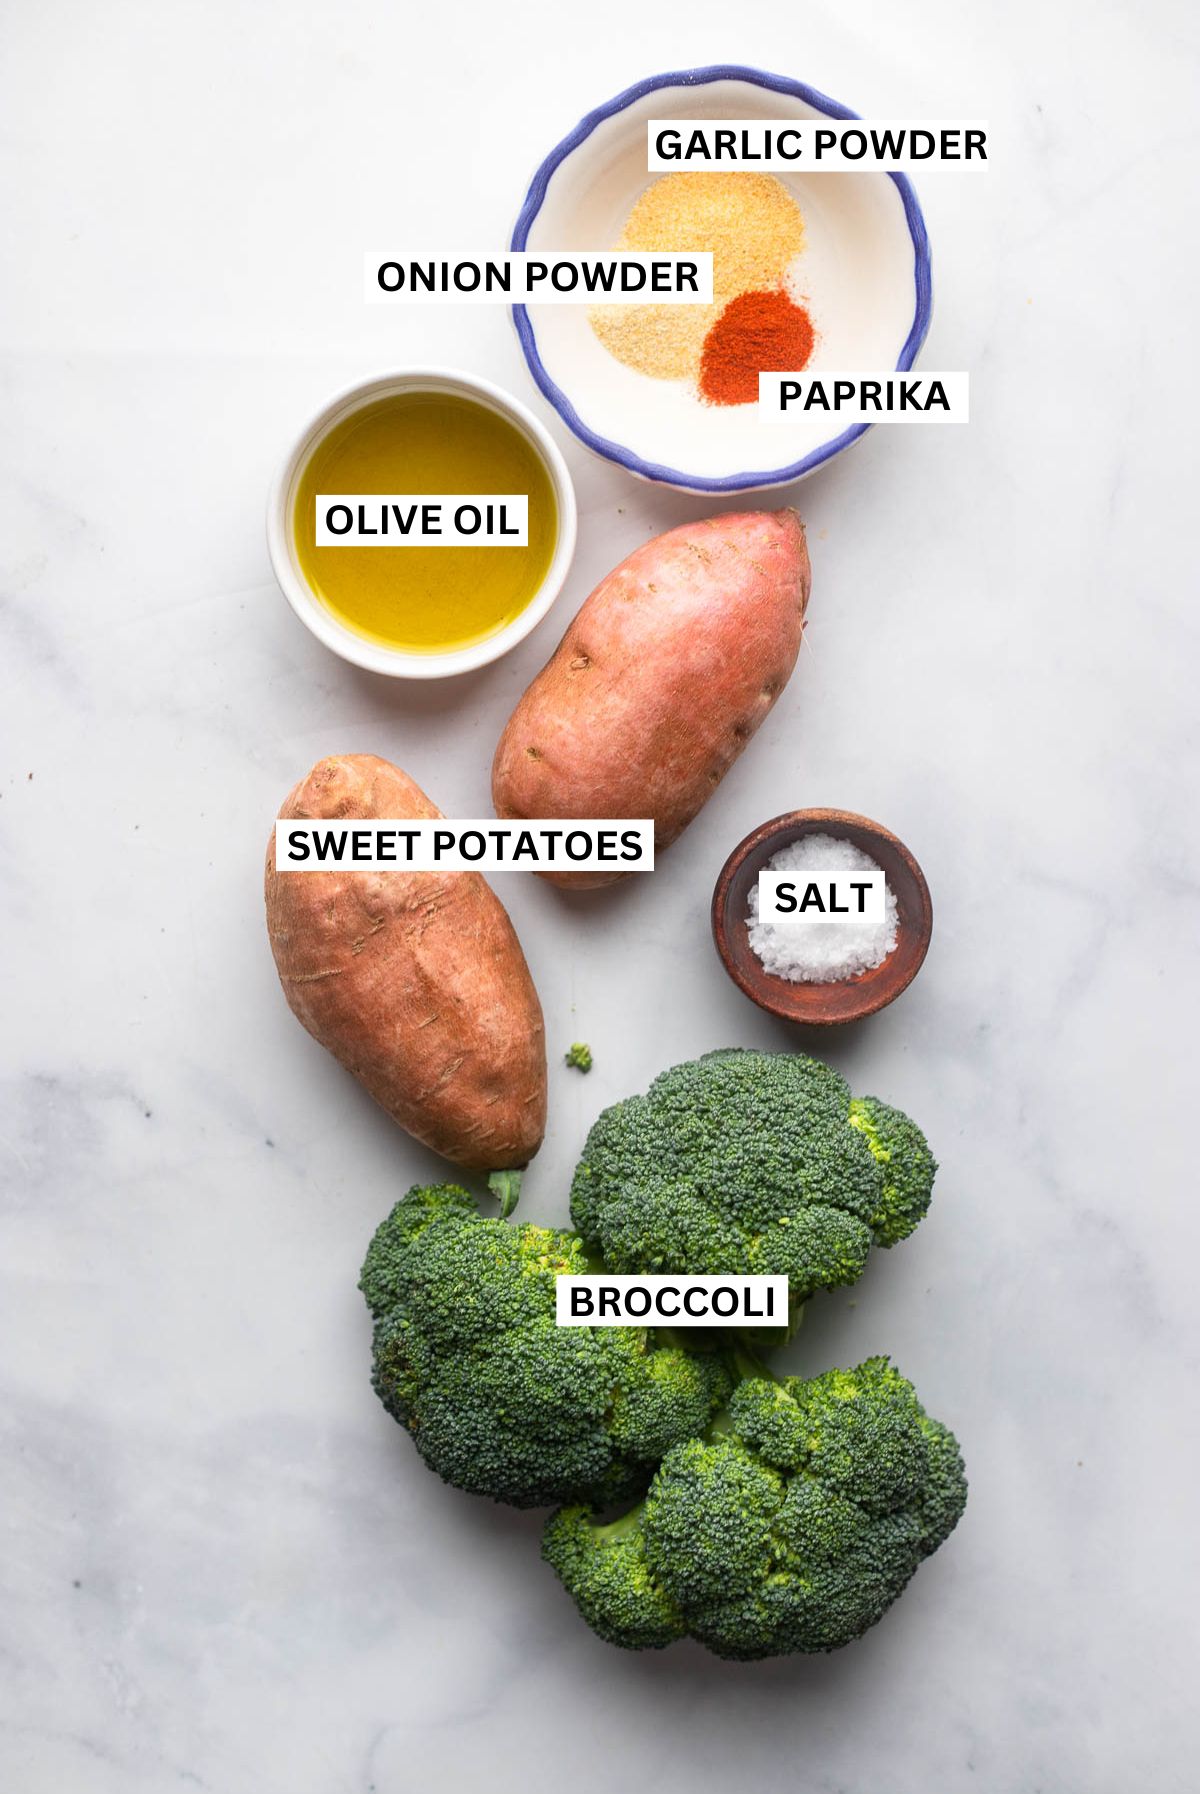 roasted broccoli and sweet potato ingredients in bowls with labels.